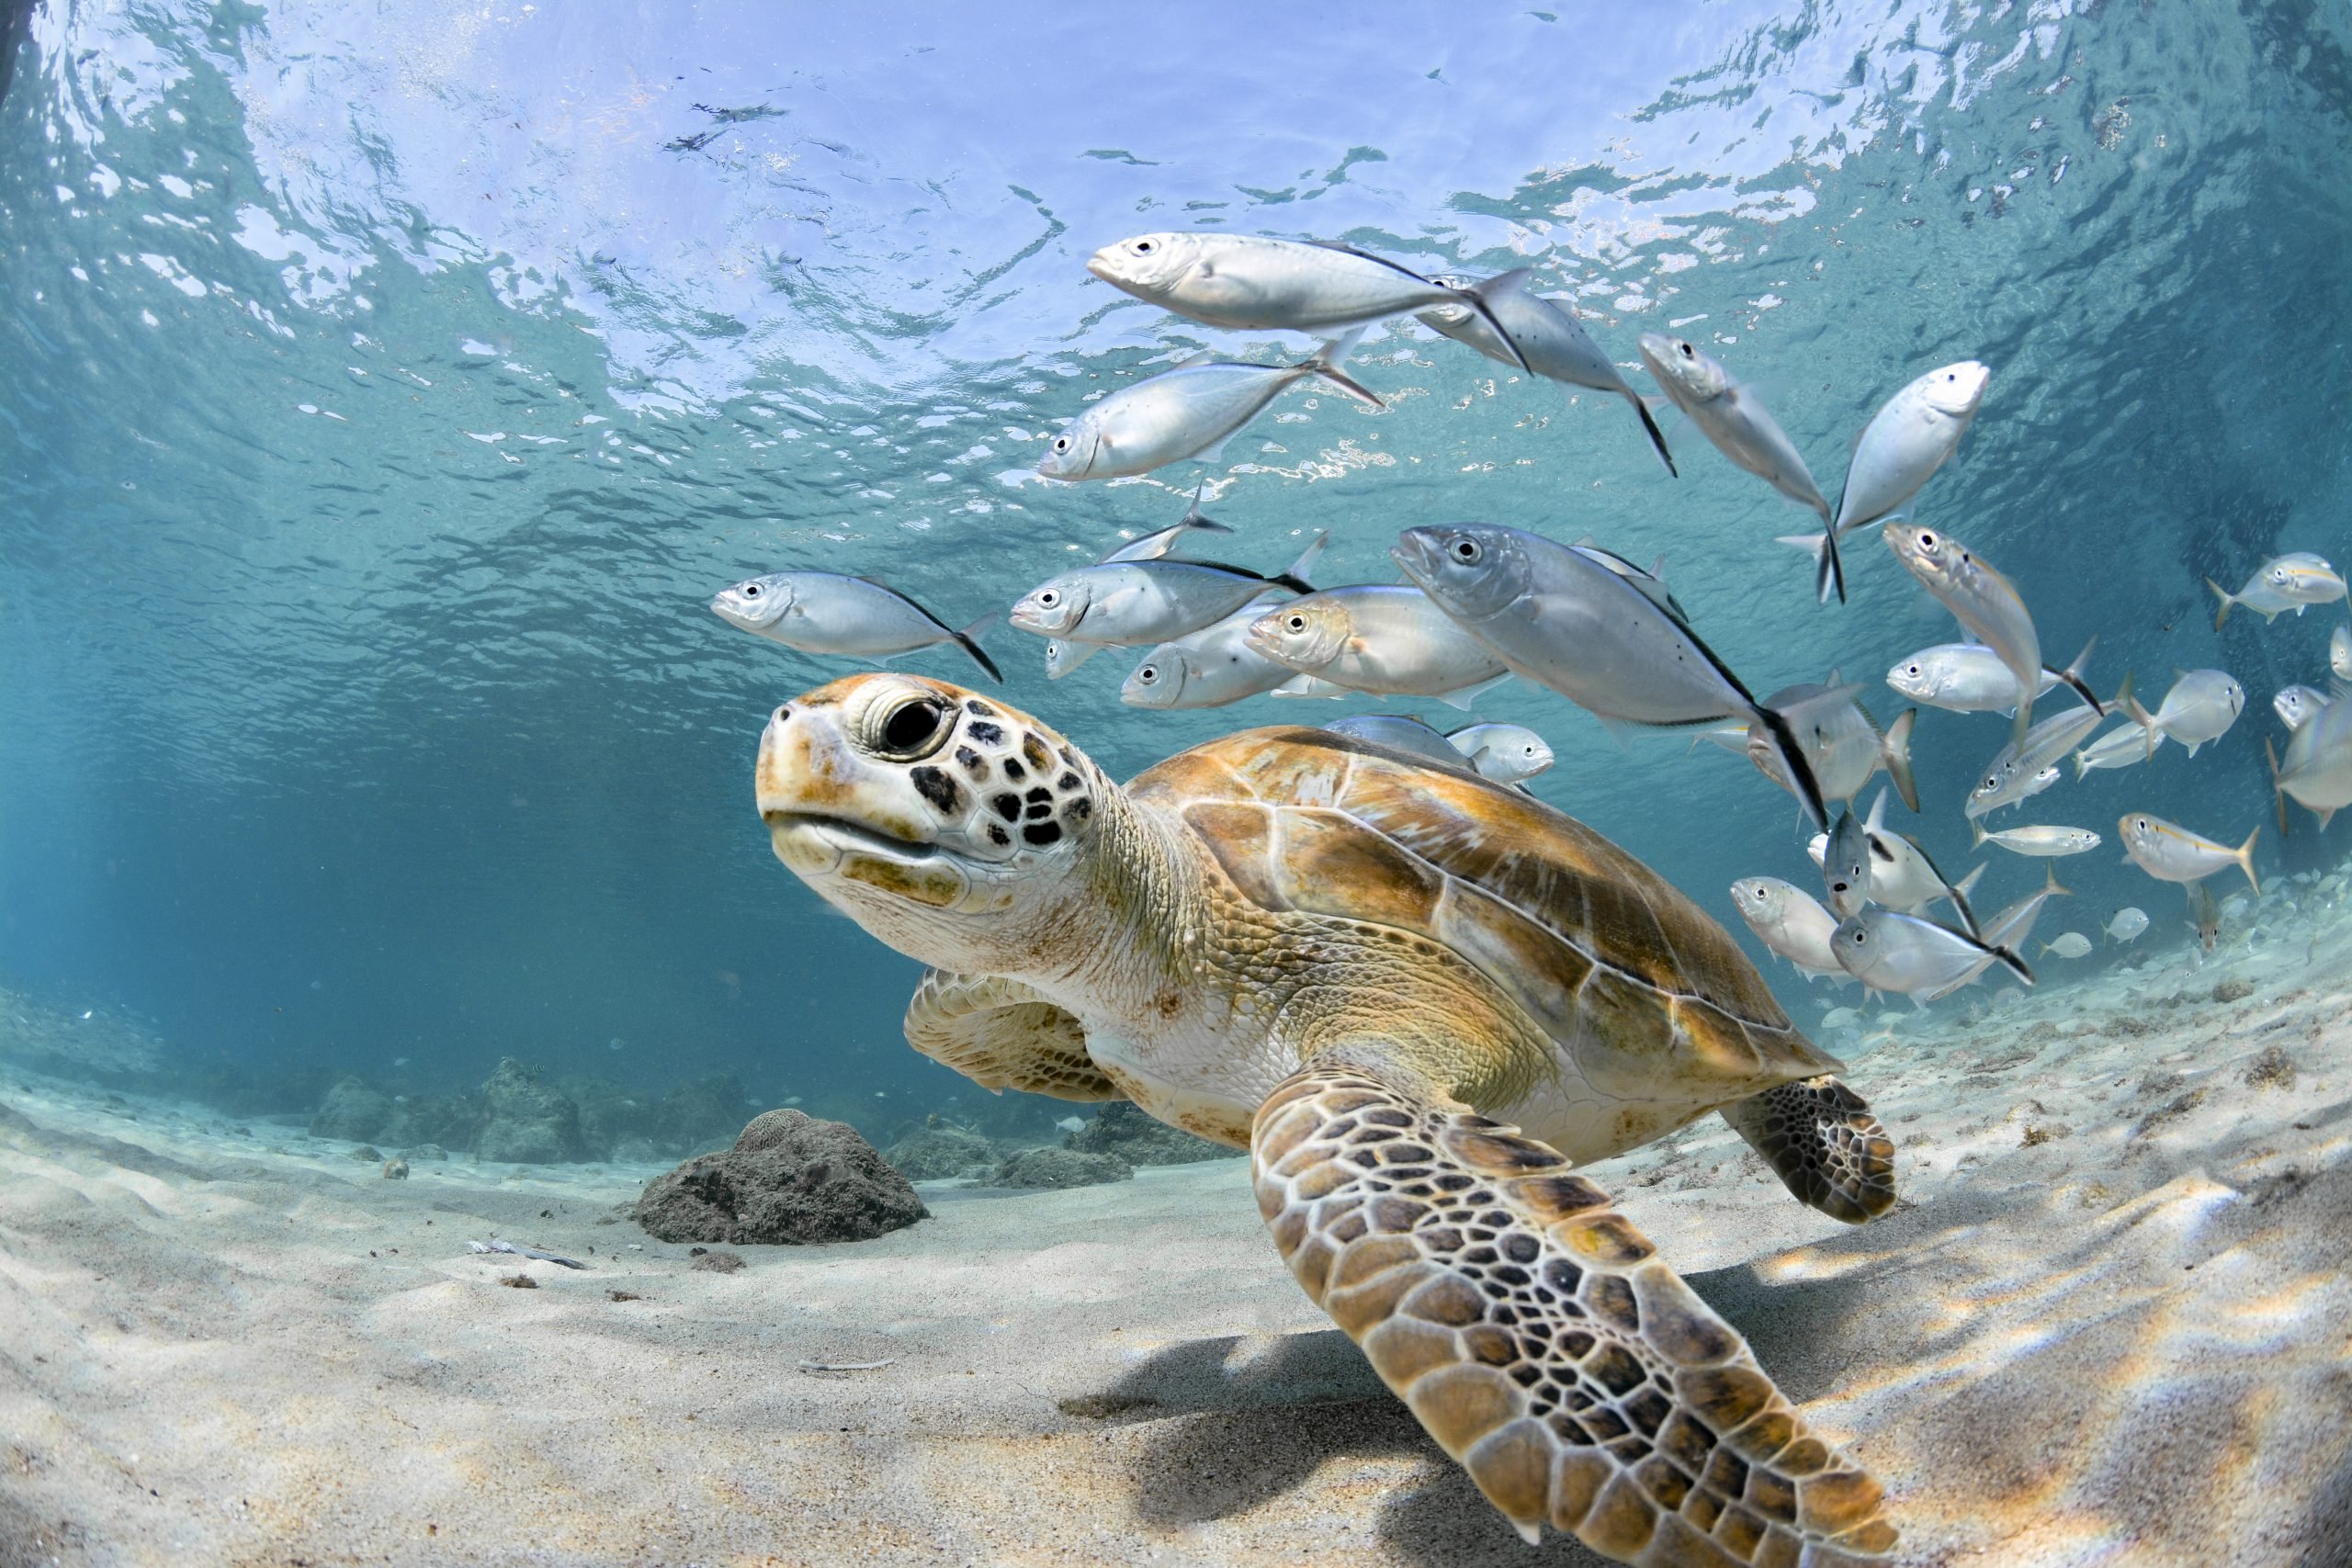 Turtle closeup with school of fish